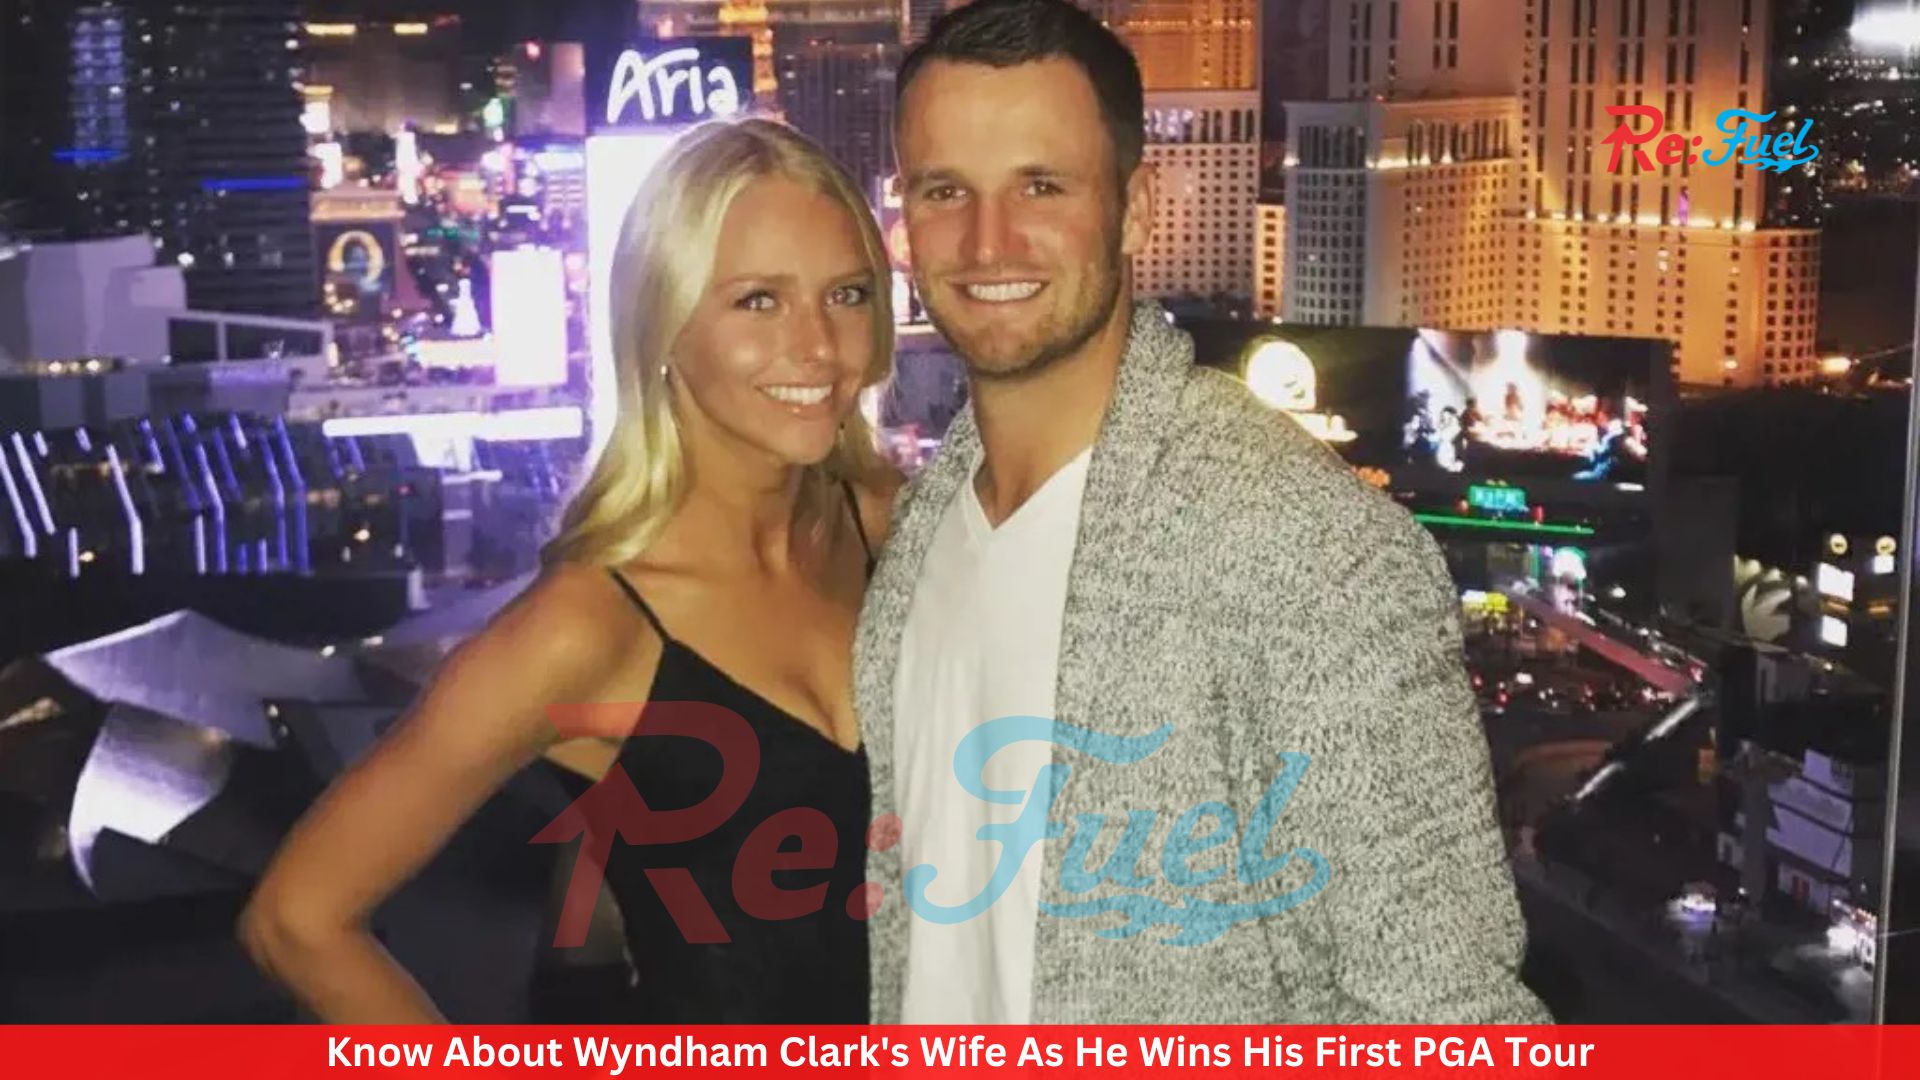 Know About Wyndham Clark's Wife As He Wins His First PGA Tour